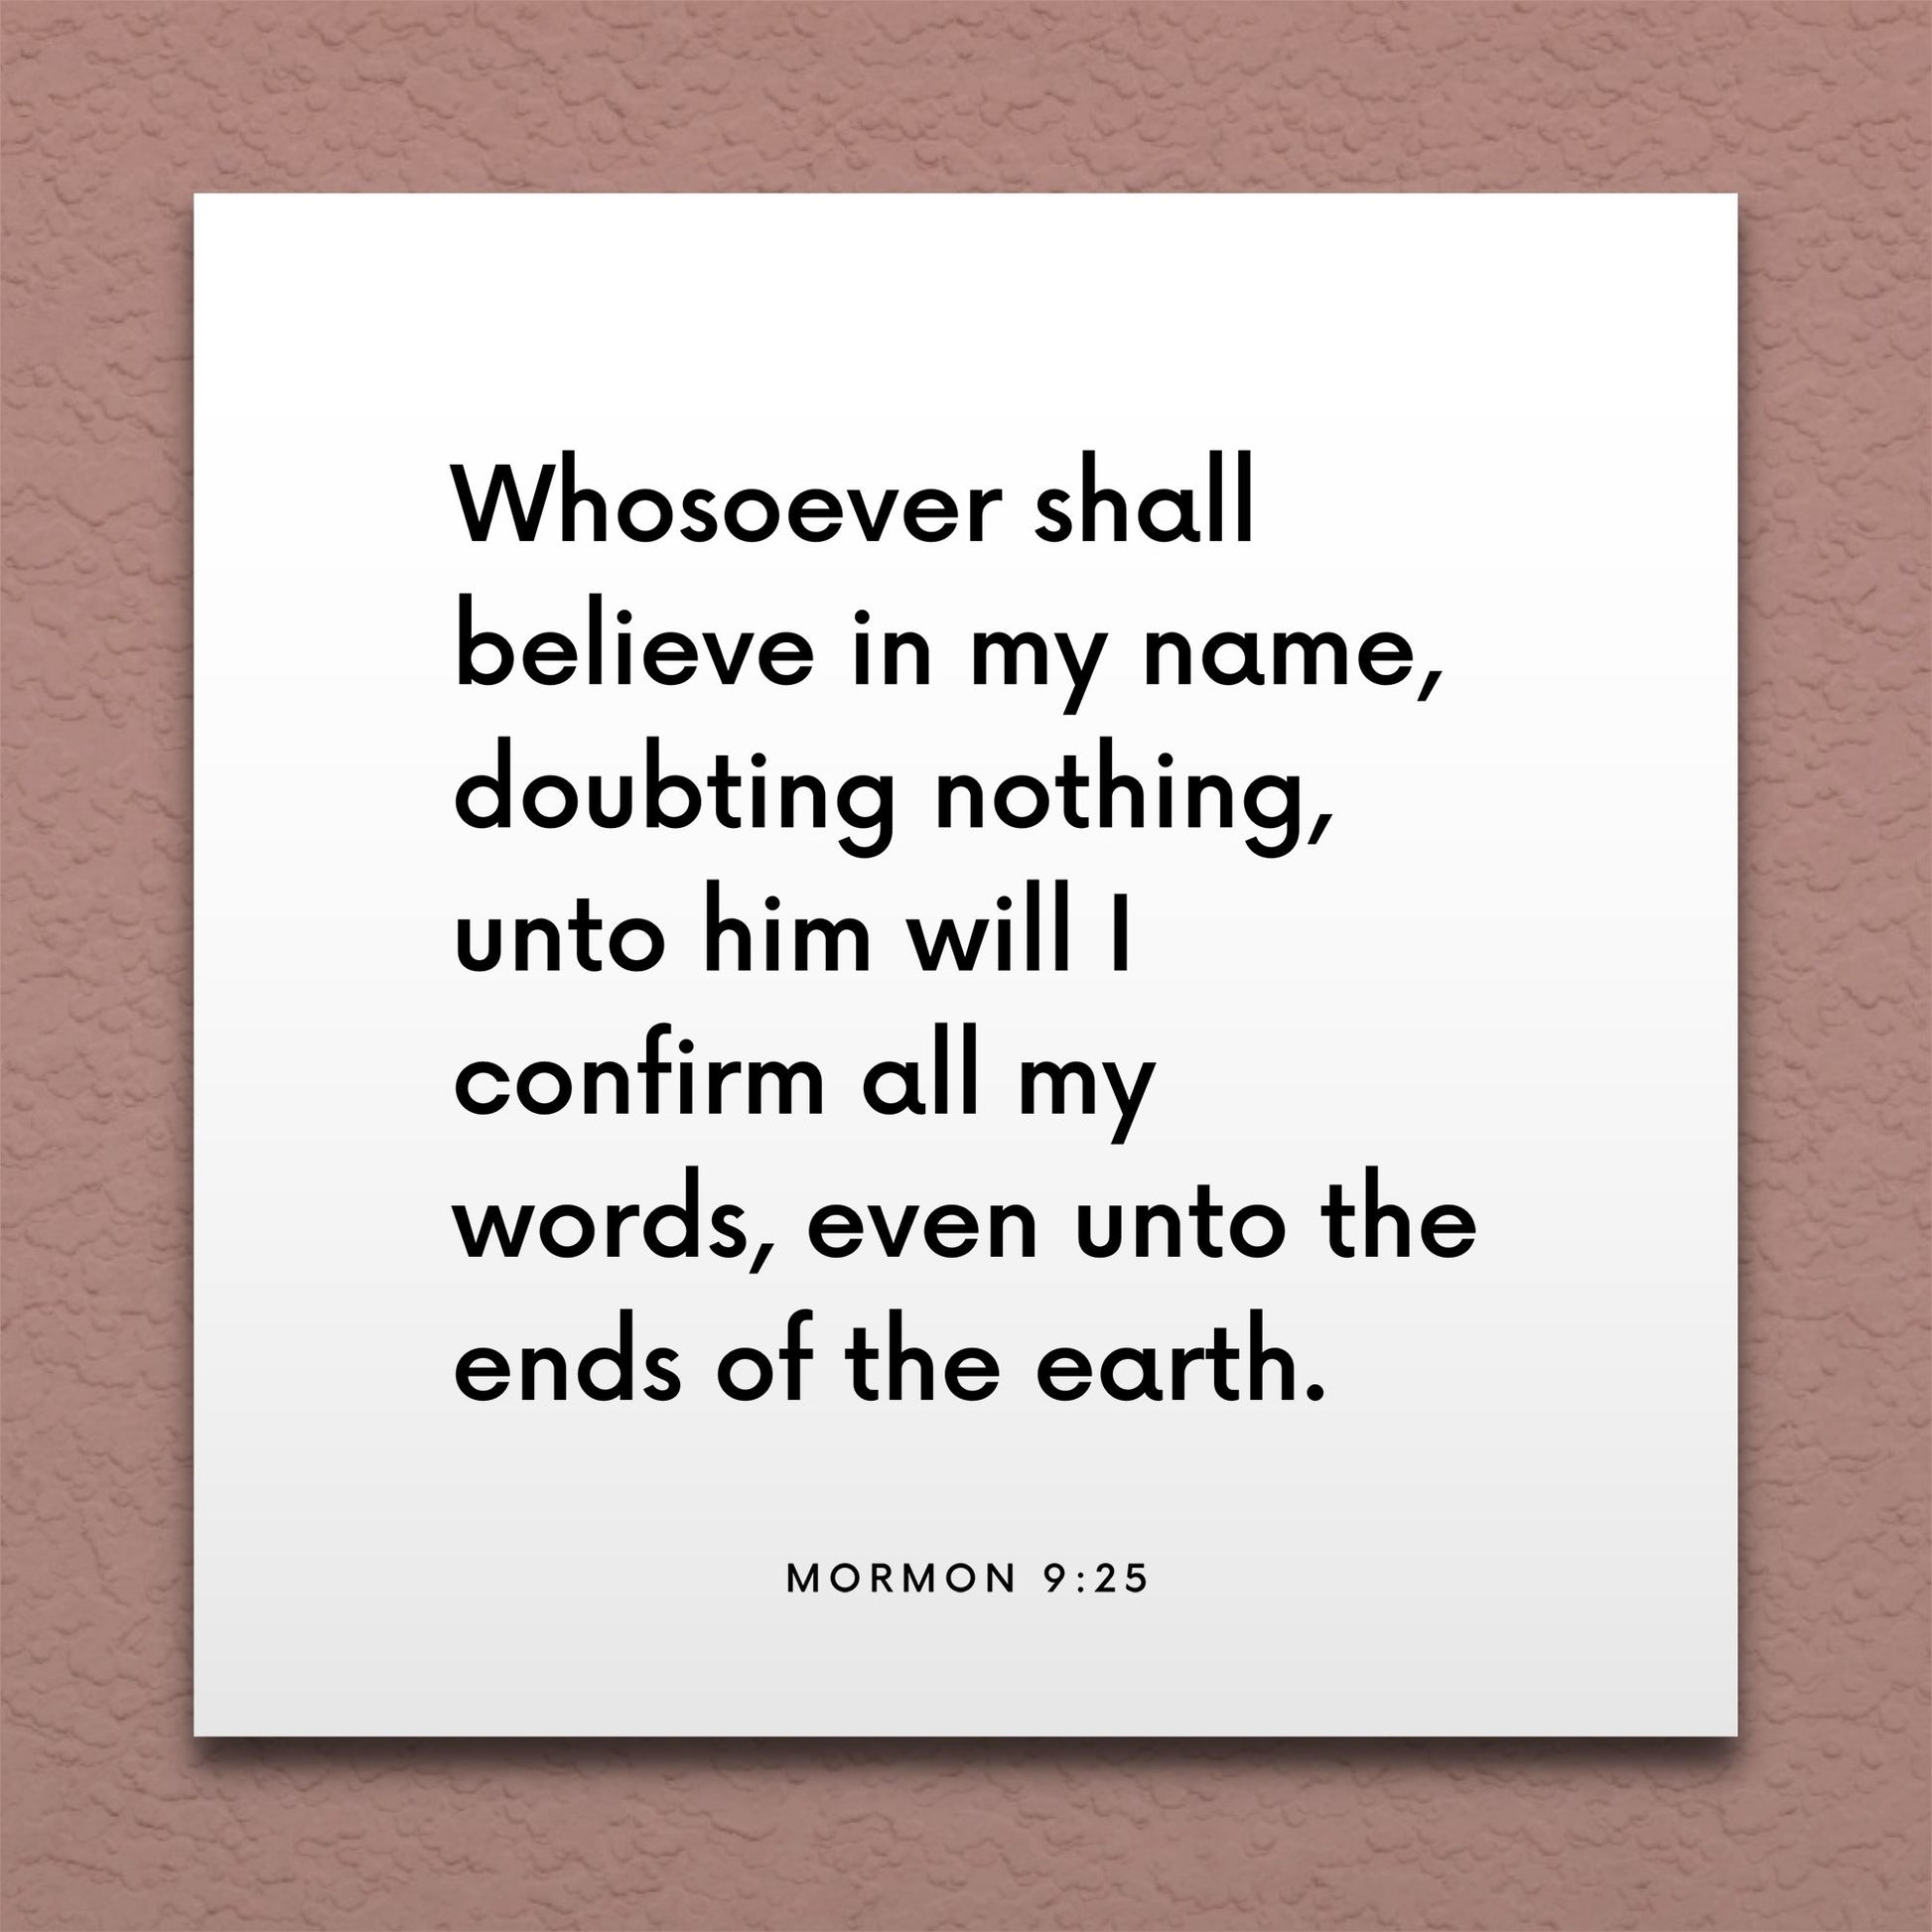 Wall-mounted scripture tile for Mormon 9:25 - "Whosoever shall believe in my name, doubting nothing"